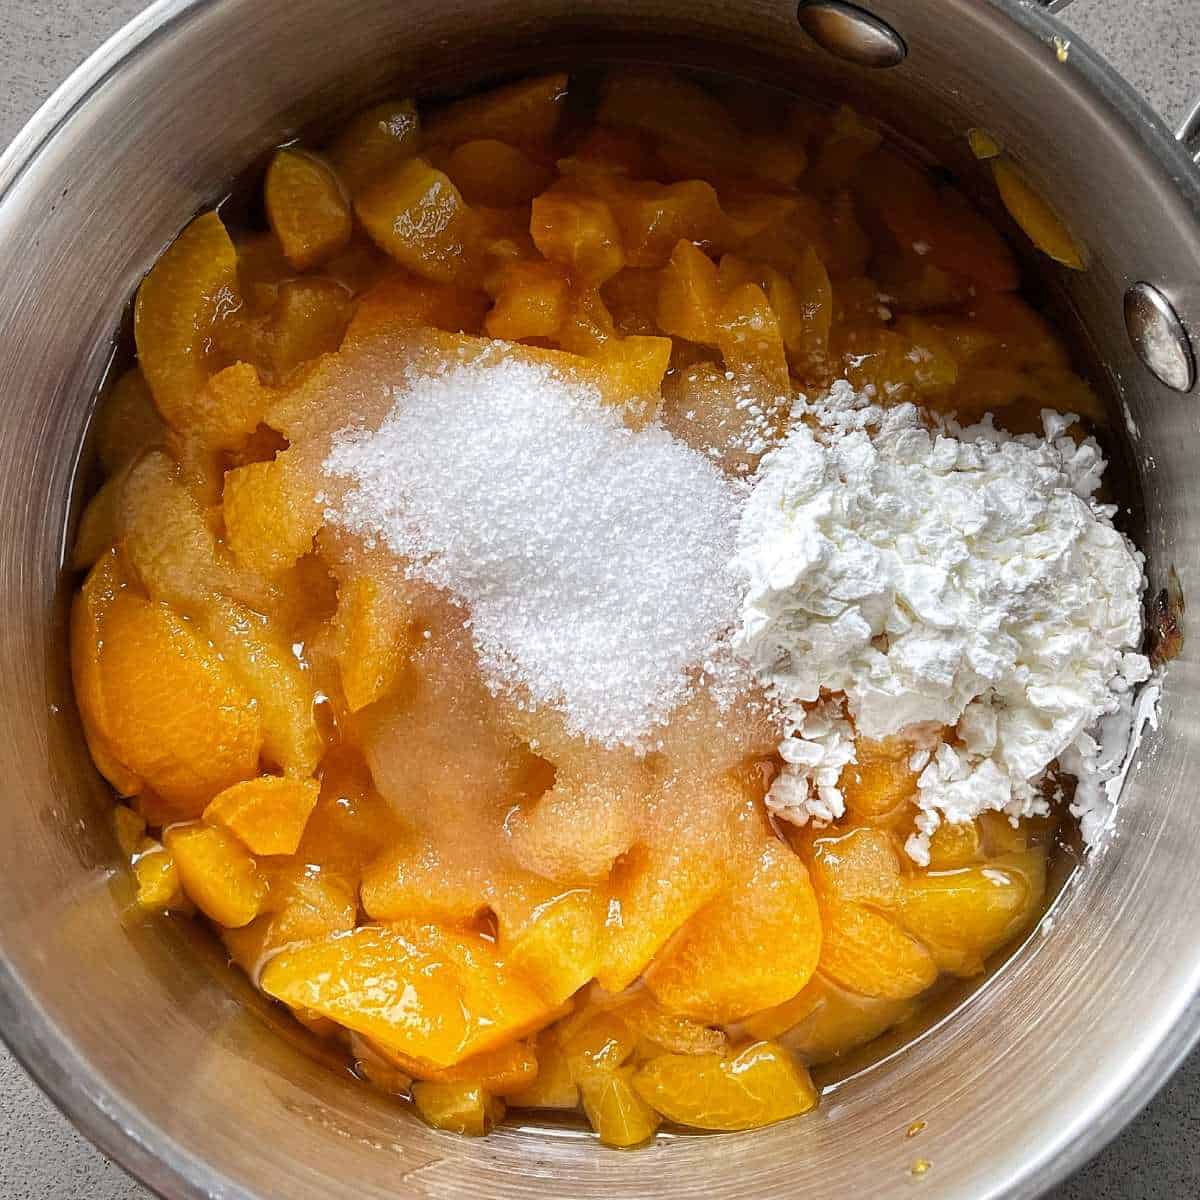 Sugar, corn flour and apricots simmering in a small pot